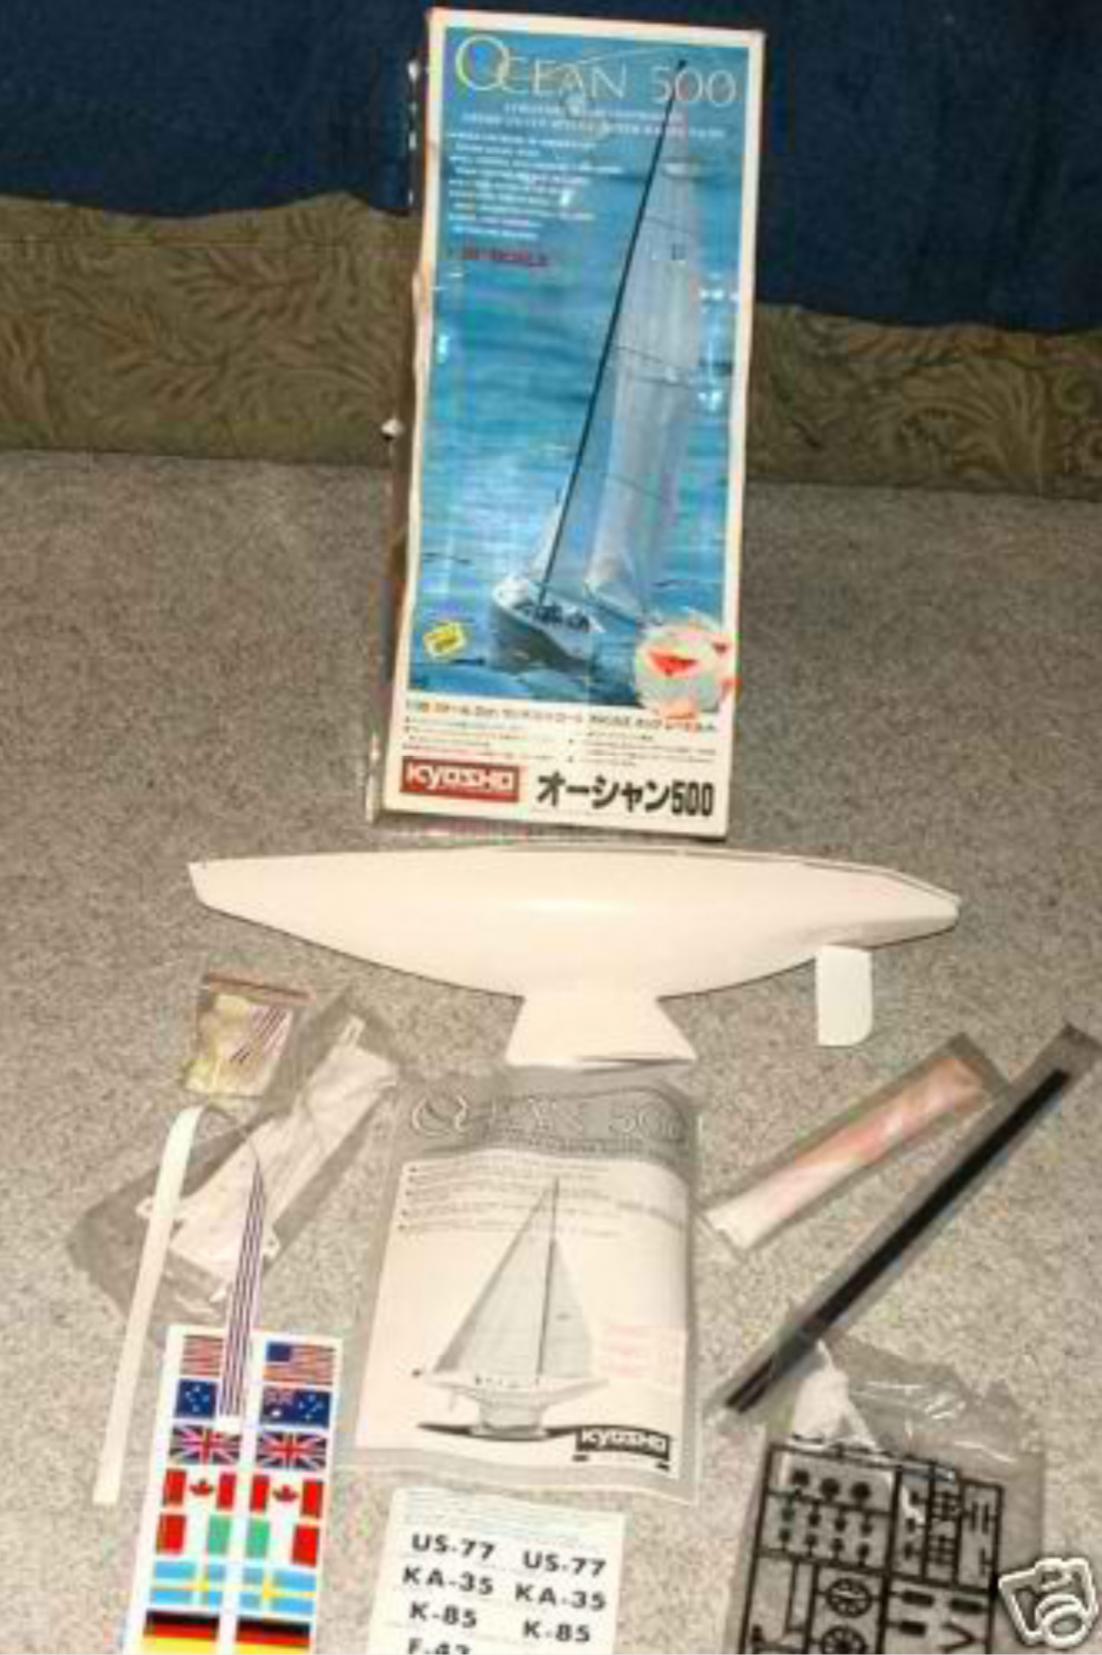 WTS - Kyosho 1/38 scale Ocean500 RC sailboat - R/C Tech Forums